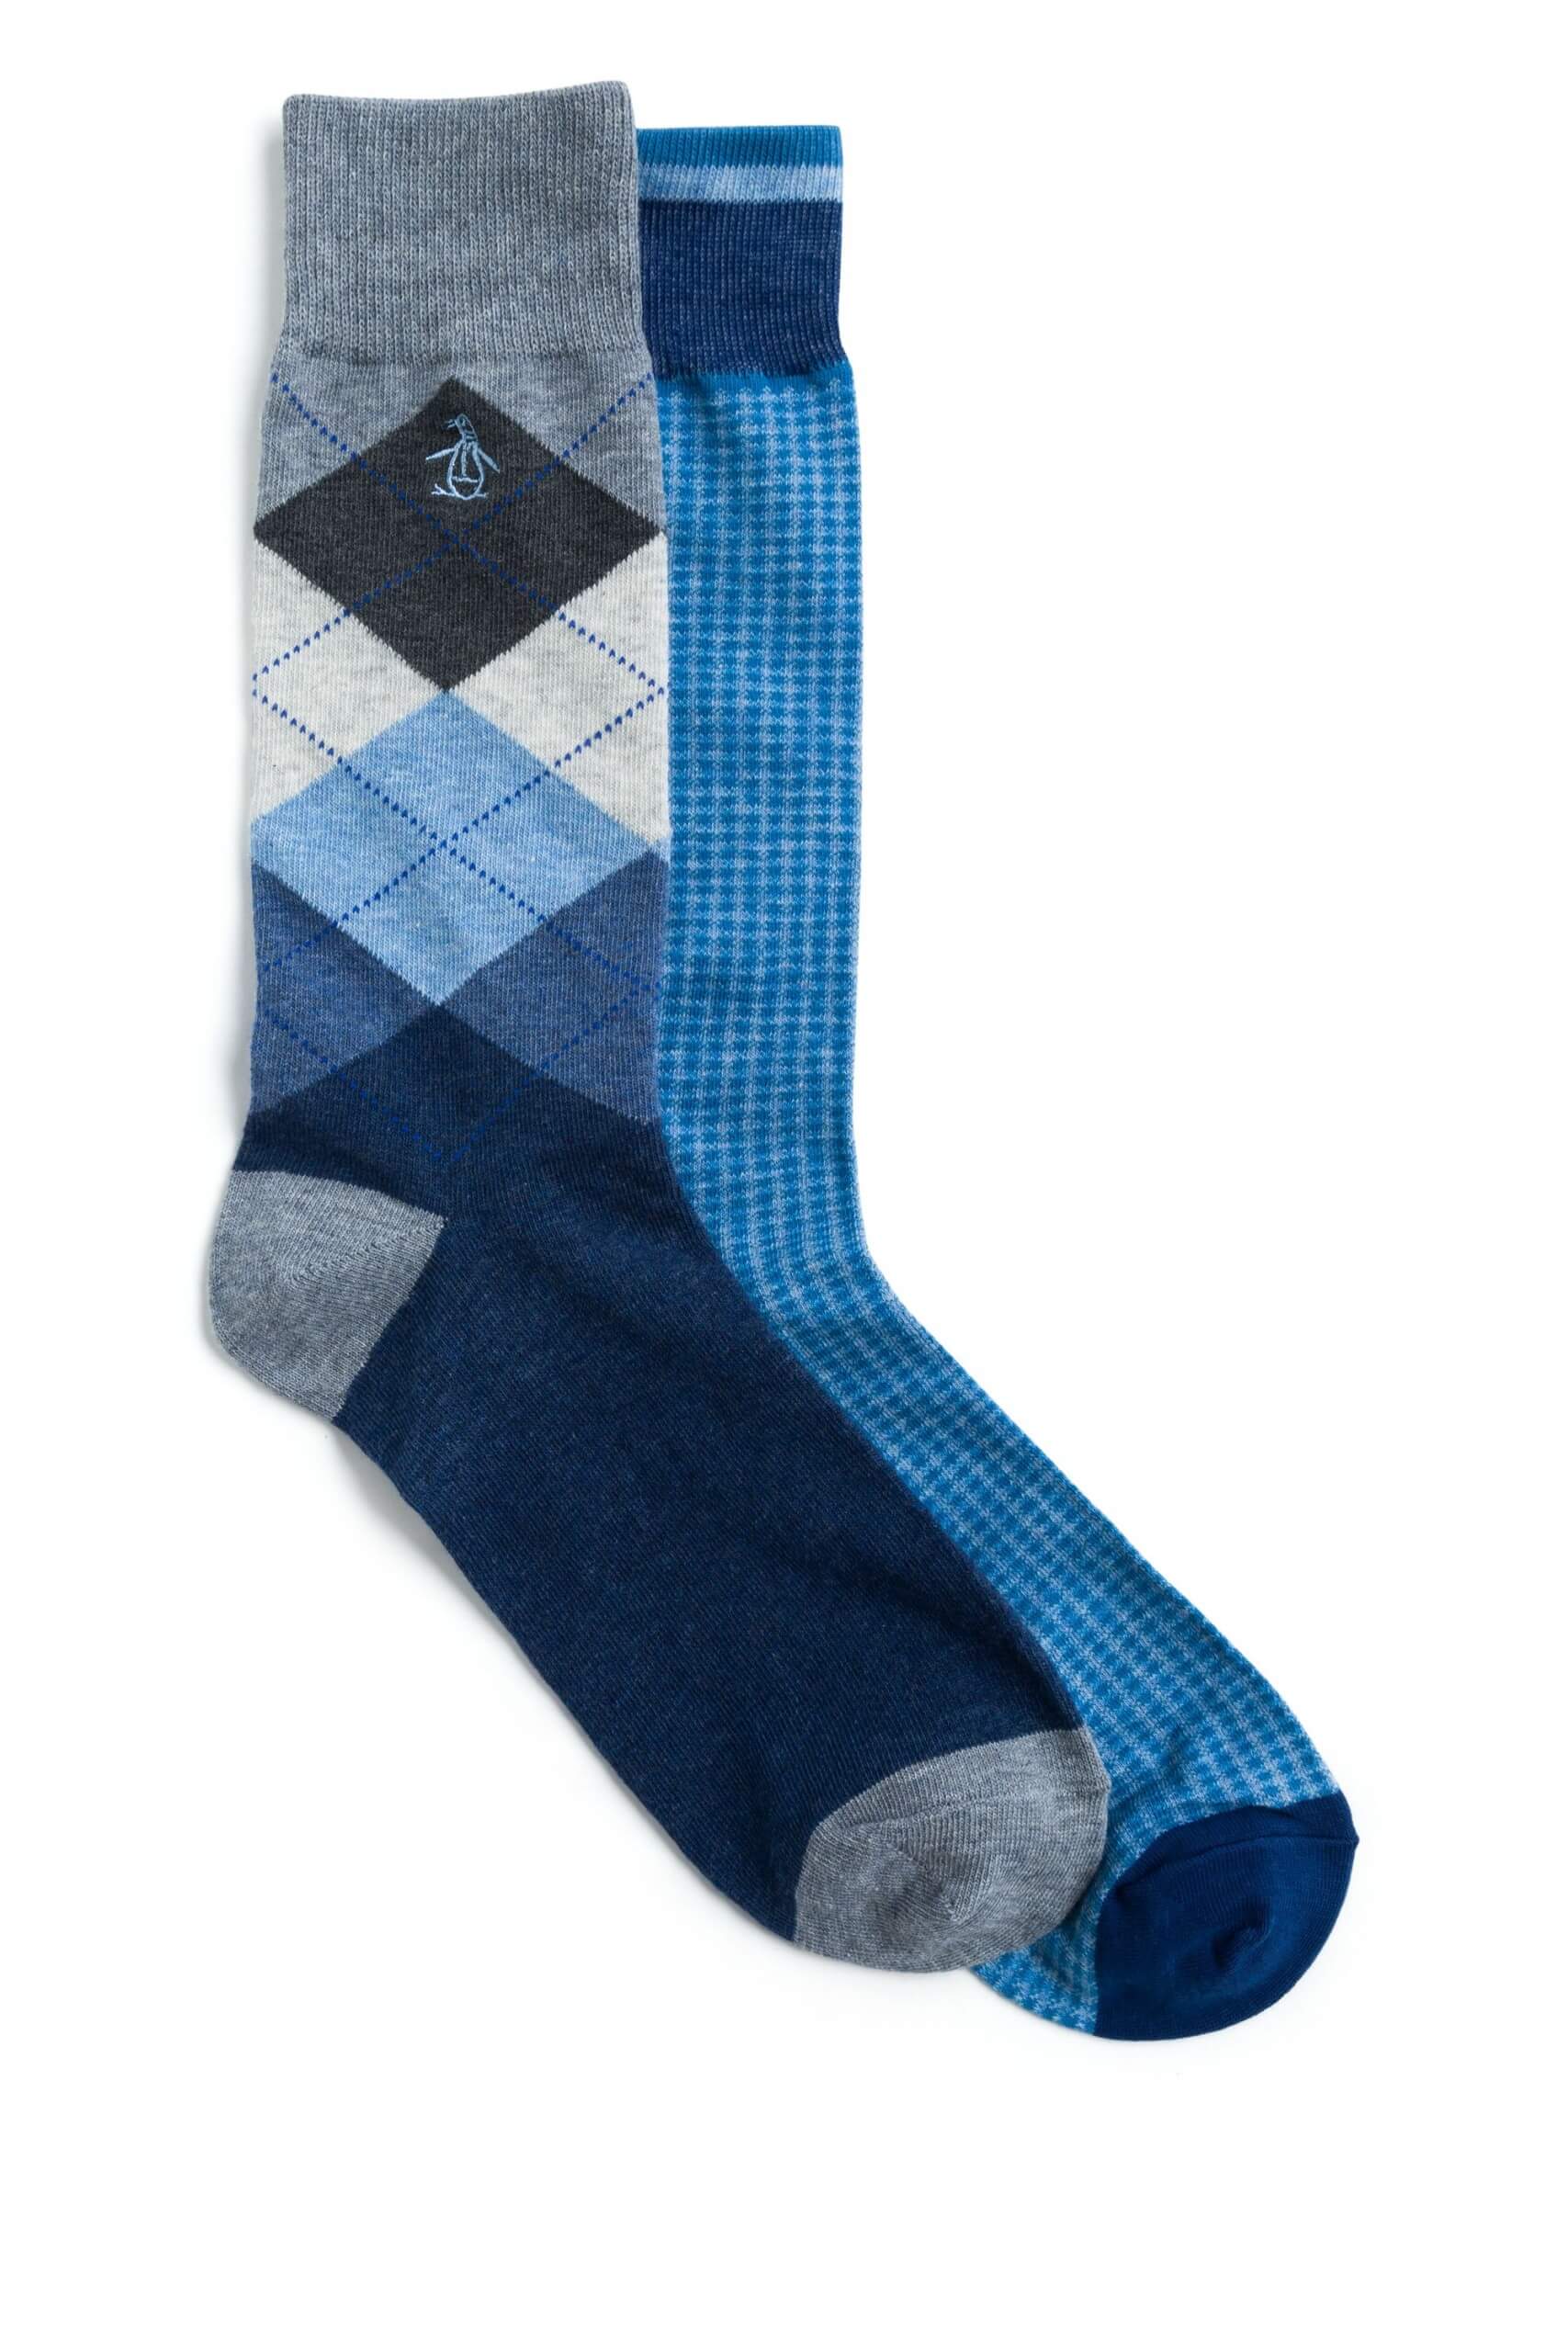 Stitch Fix Men’s blue socks with argyle and checkered pattern.